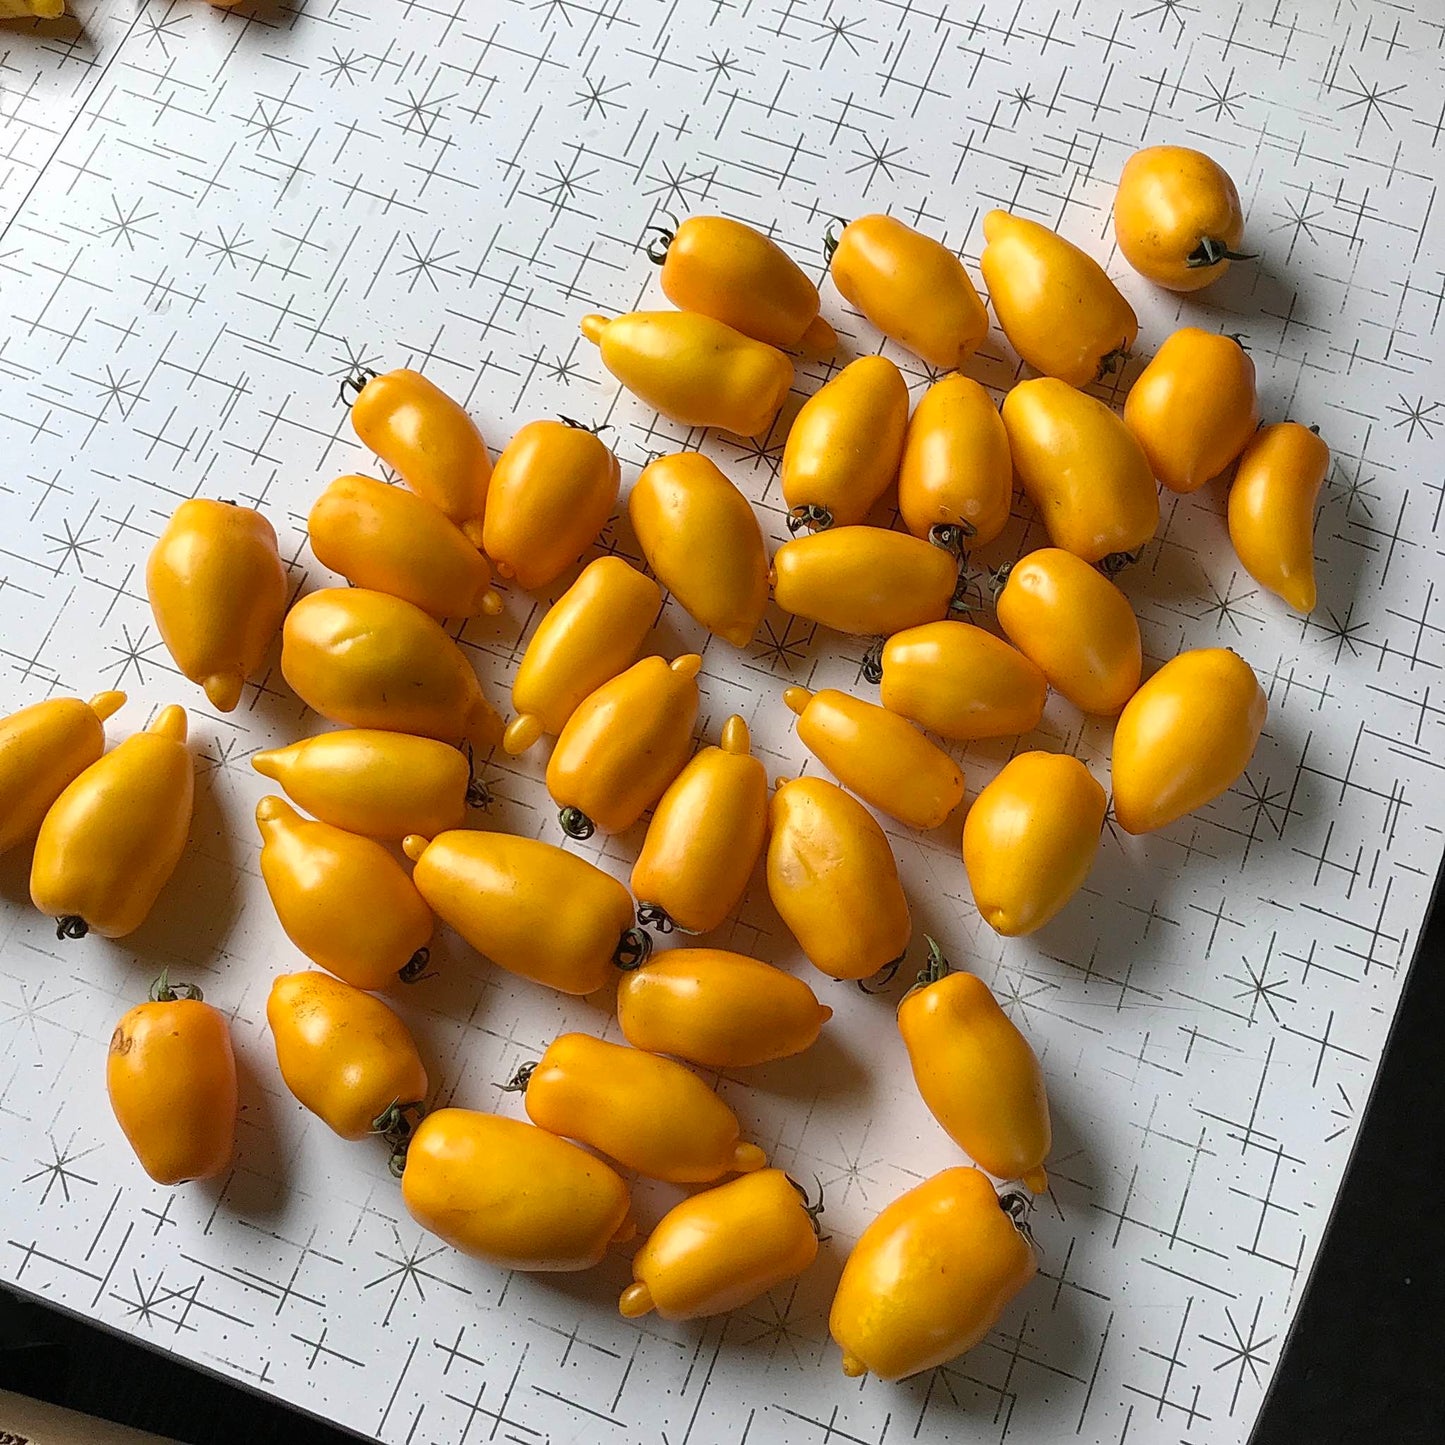 Dozens of yellow roma tomatoes on a table.